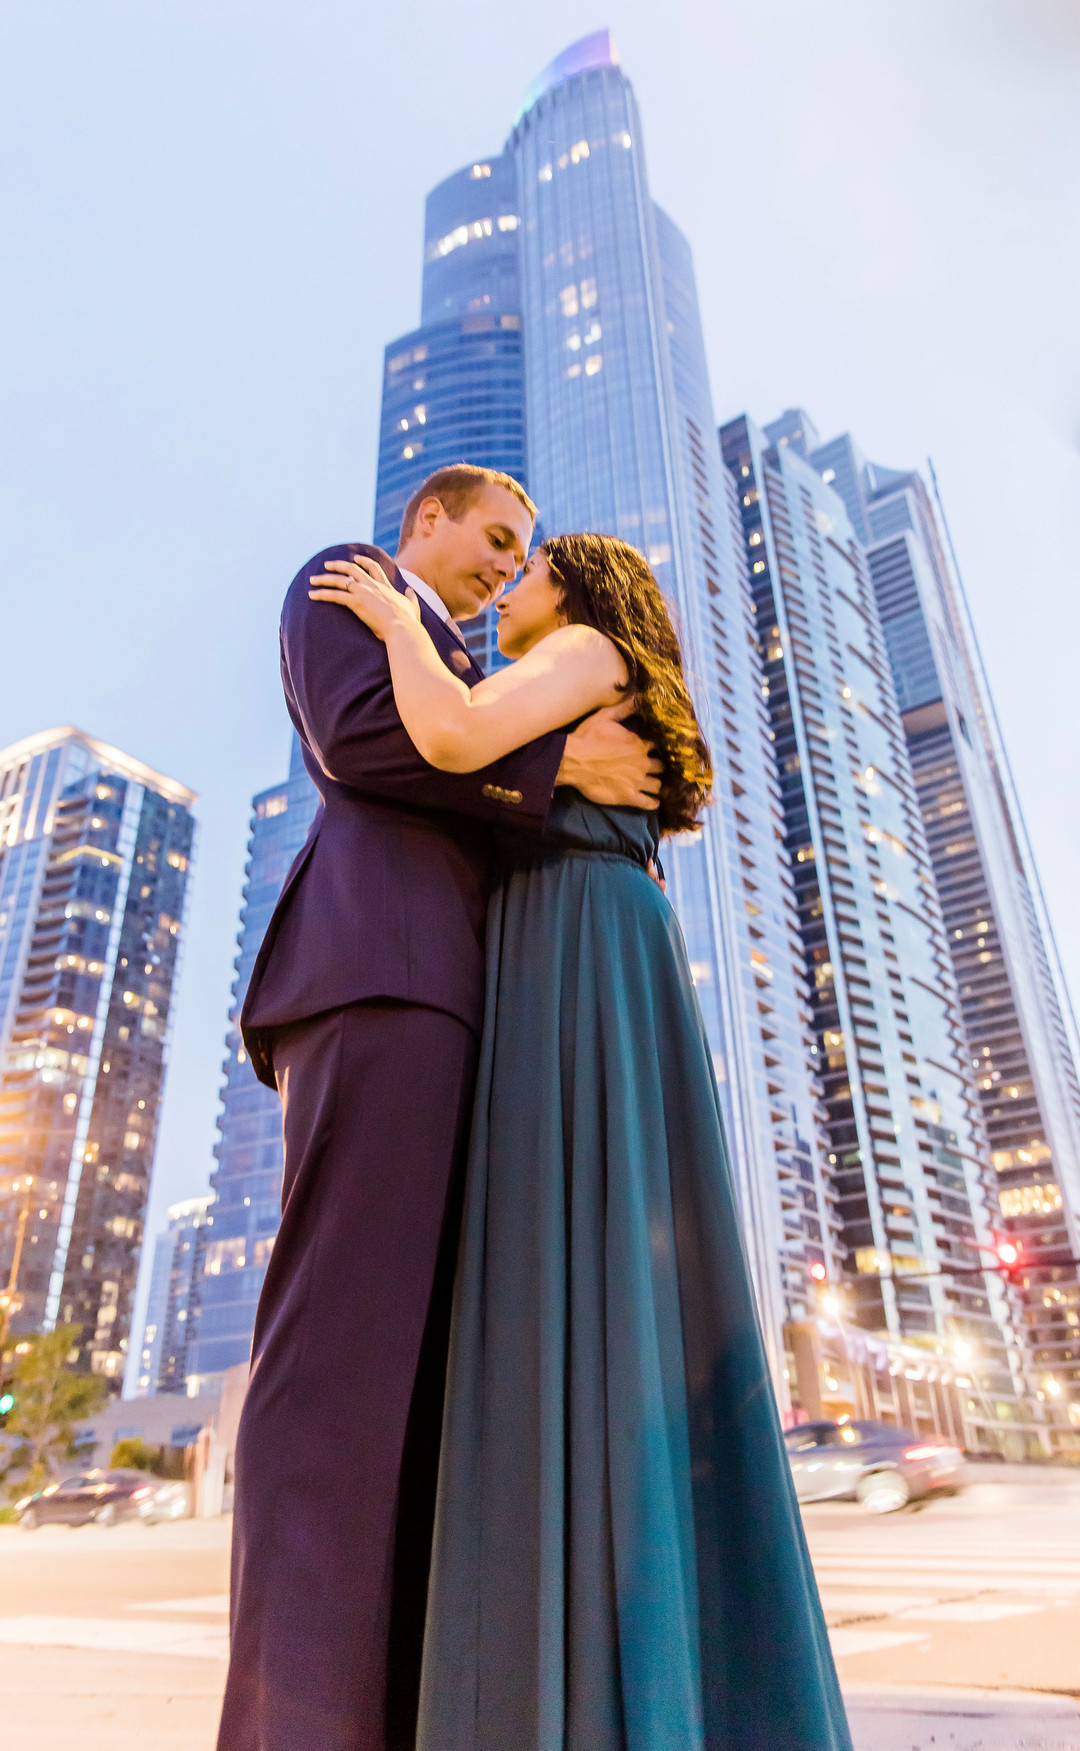 Chicago engagement session inspiration featured on CHI thee WED. See more engagement session ideas at CHItheeWED.com!